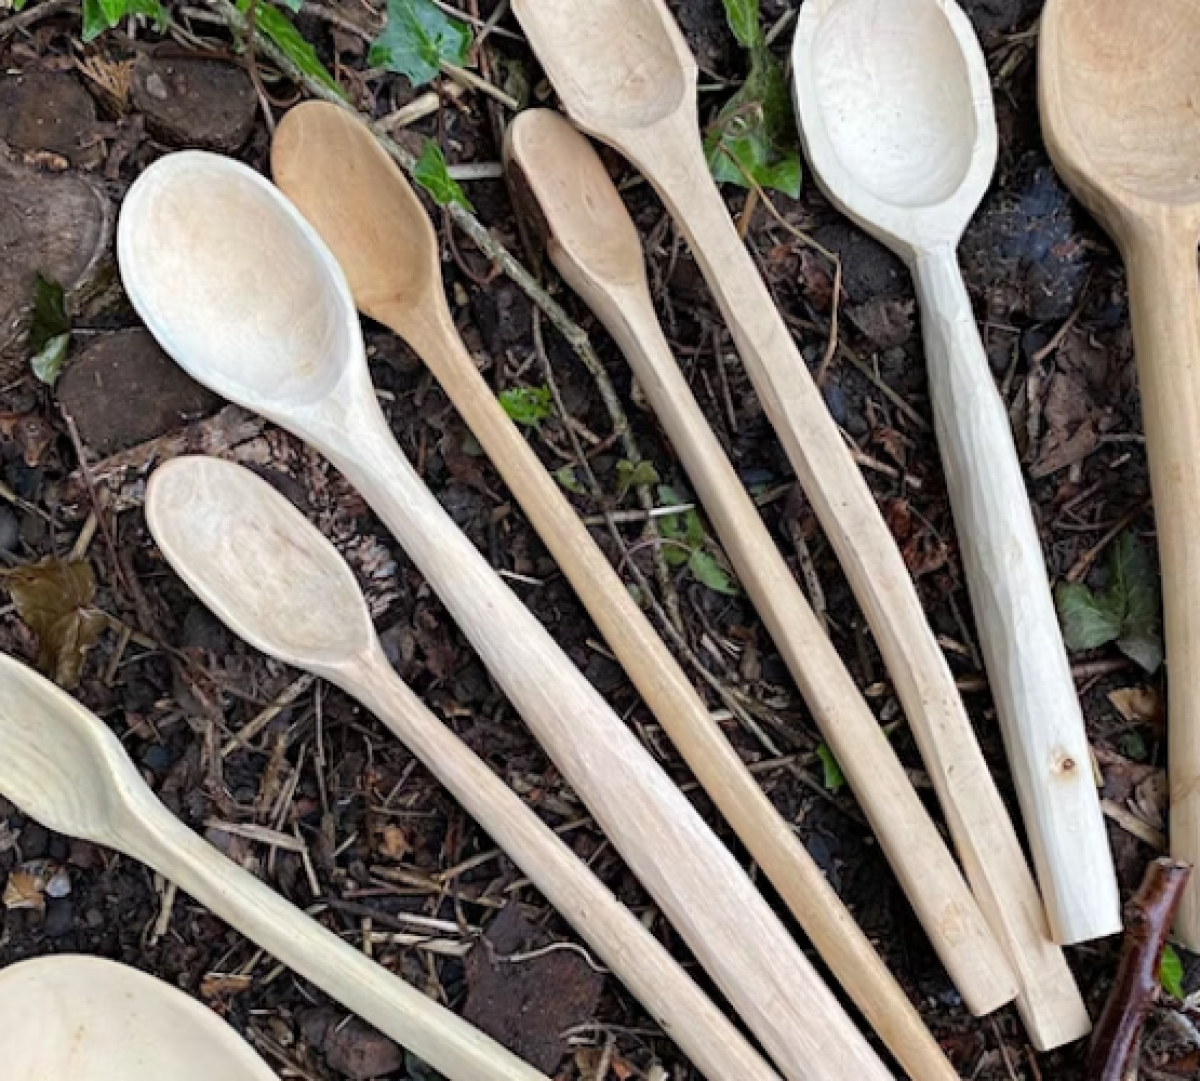 carved wooden spoons laid out on the Forest floor